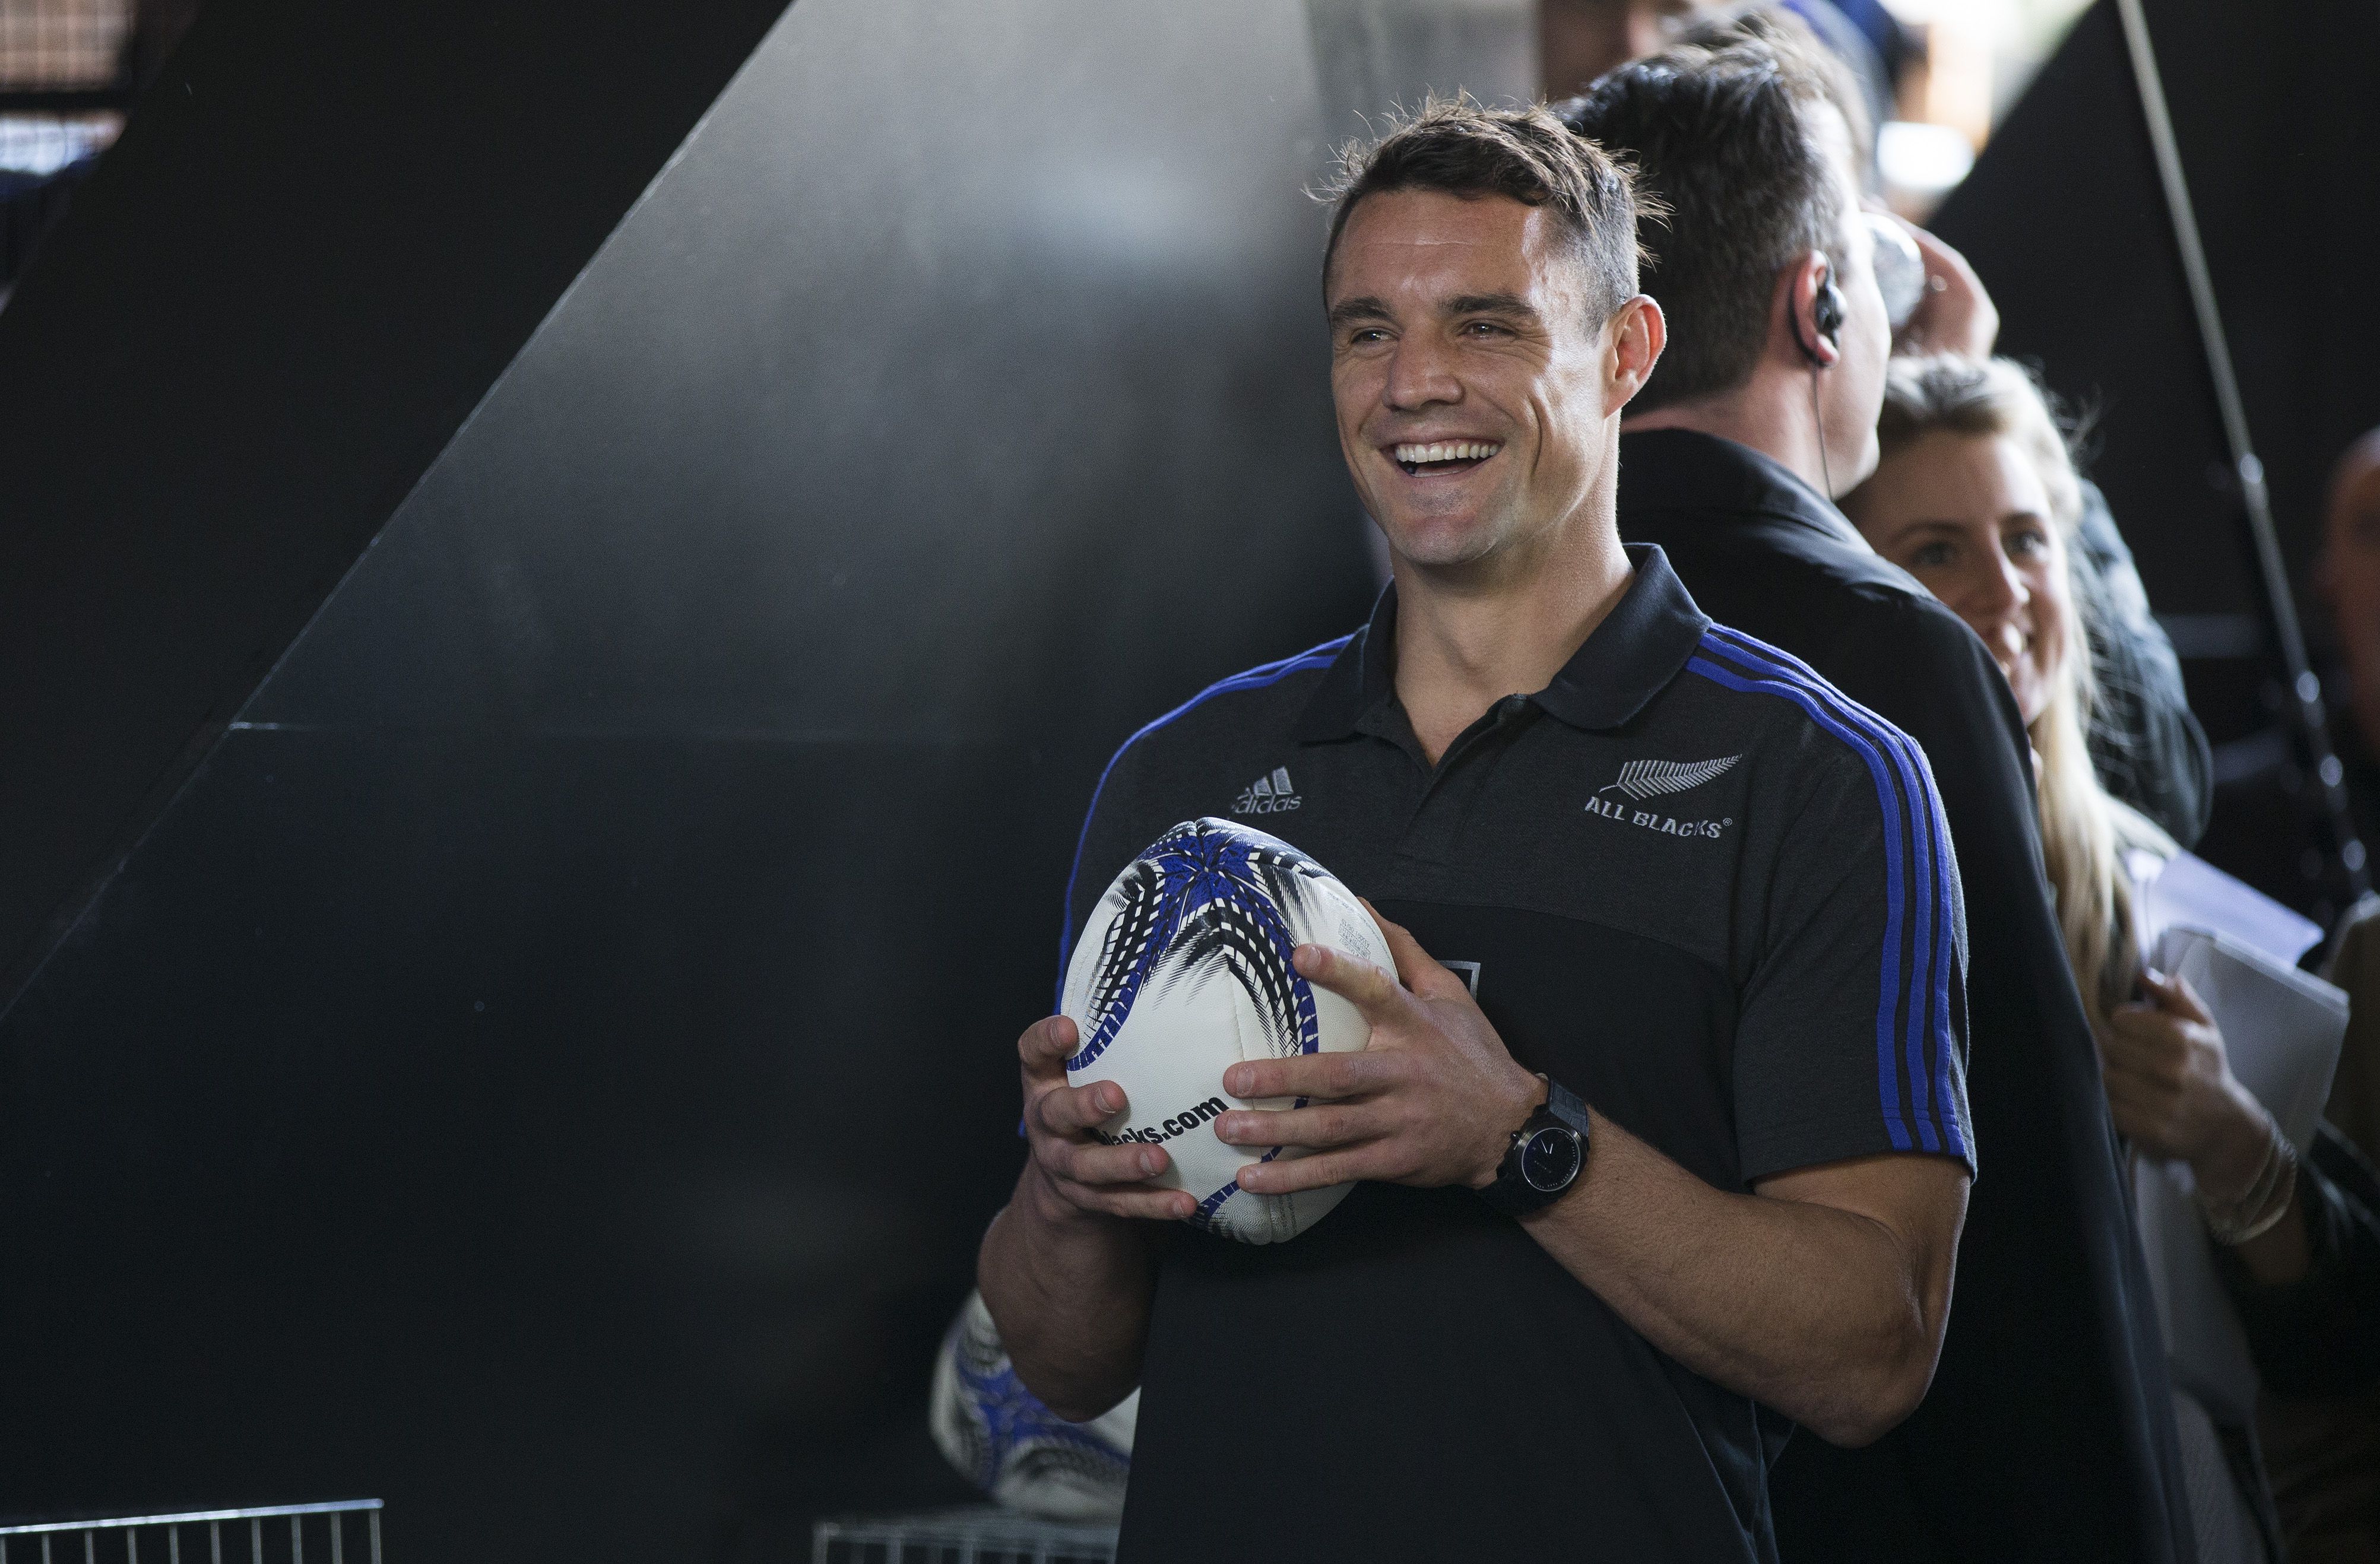 Rugby: Dan Carter takes son to first All Blacks test - NZ Herald